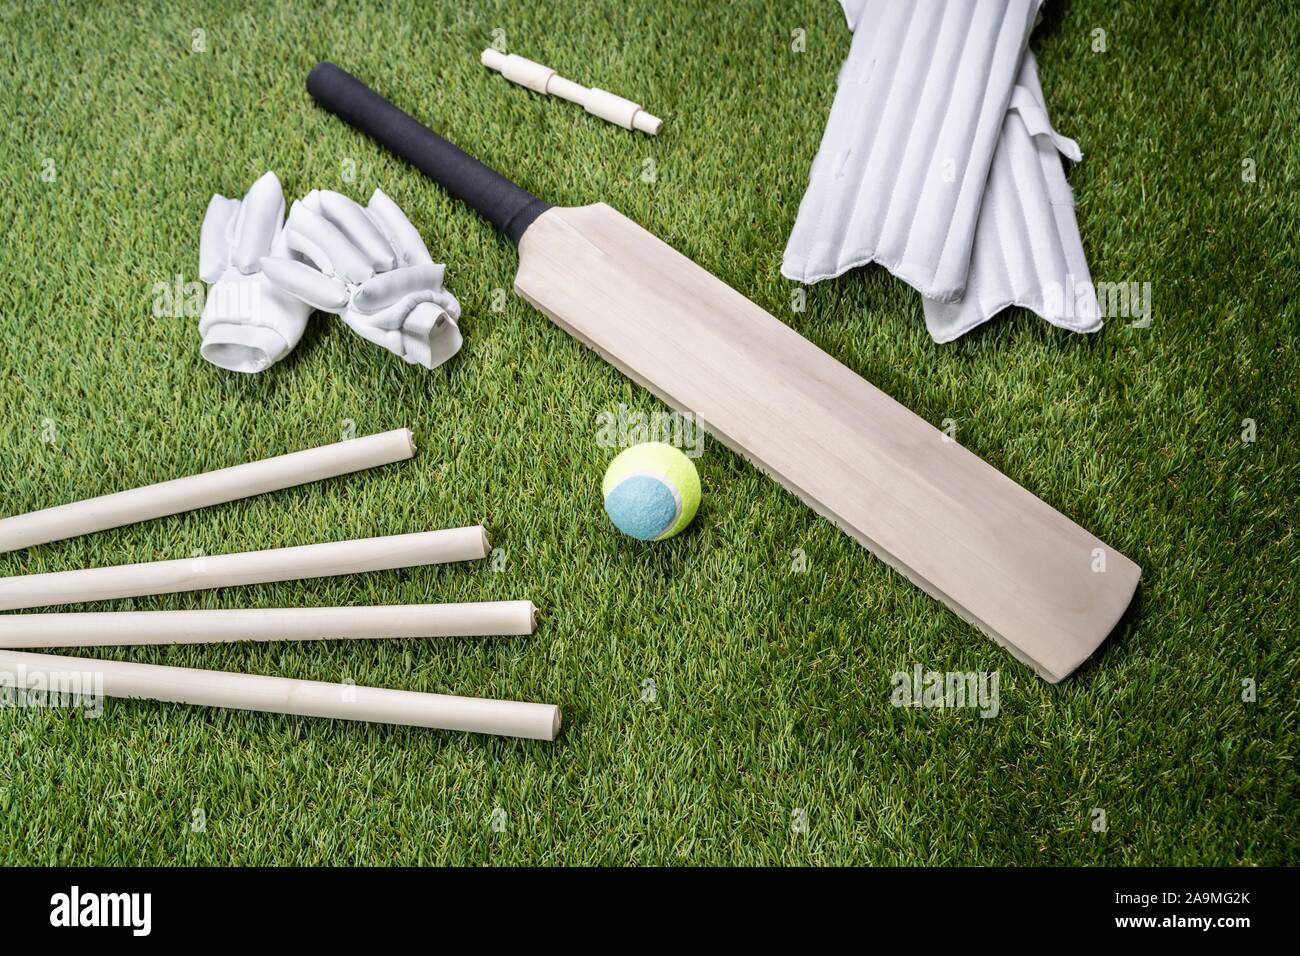 Close-up Of Wooden Cricket Bat And Ball On Turf Grass Stock Photo